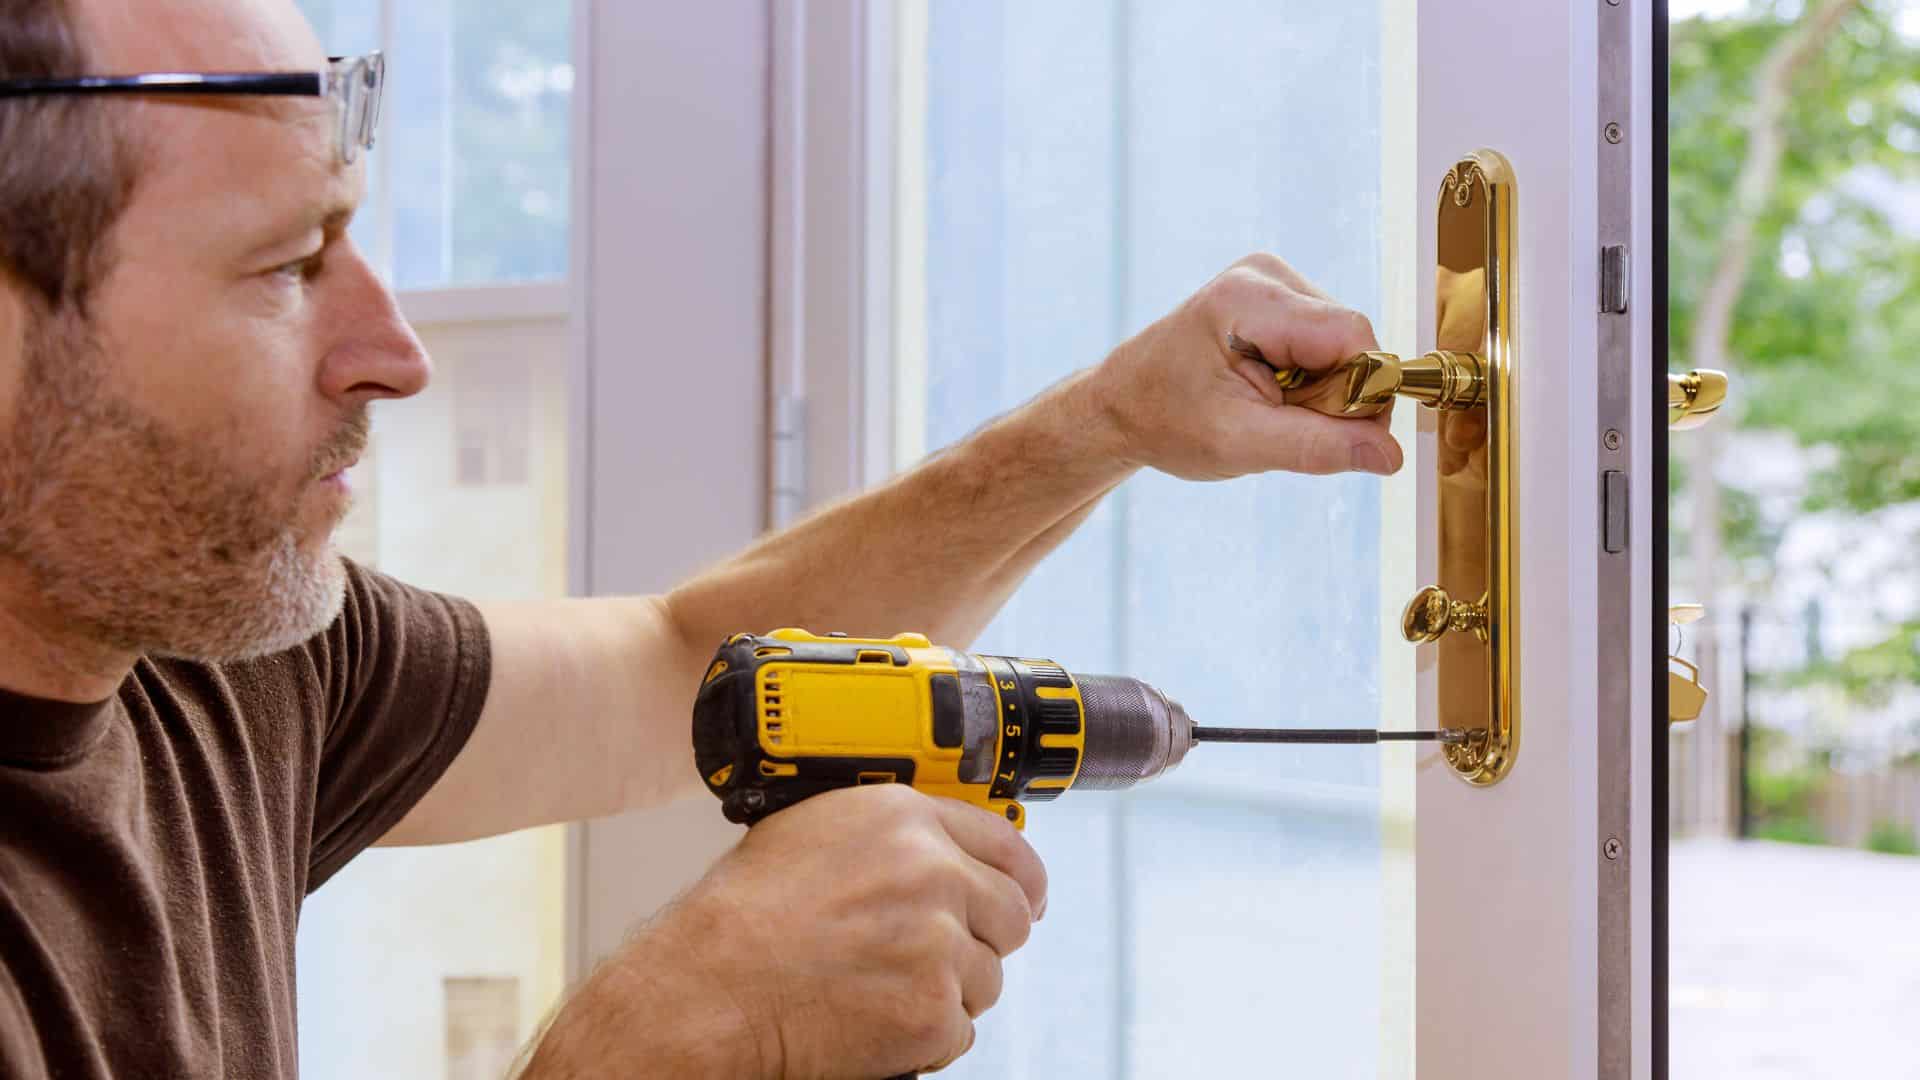 How to recognize a fake locksmith